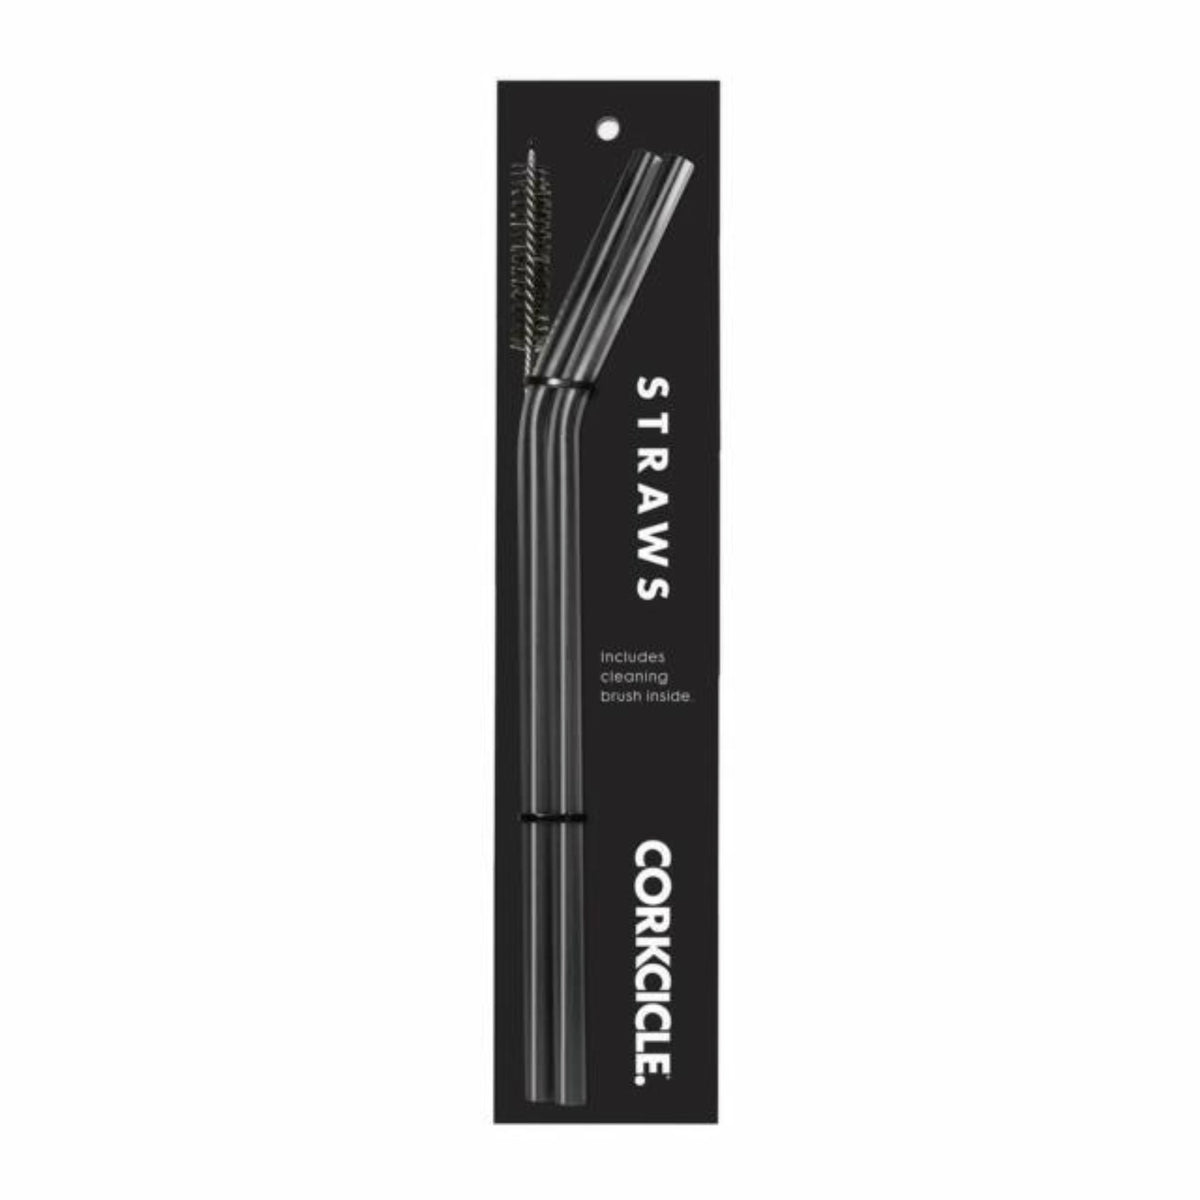 Corkcicle Gunmetal Stainless Steel Straw 2-Pack